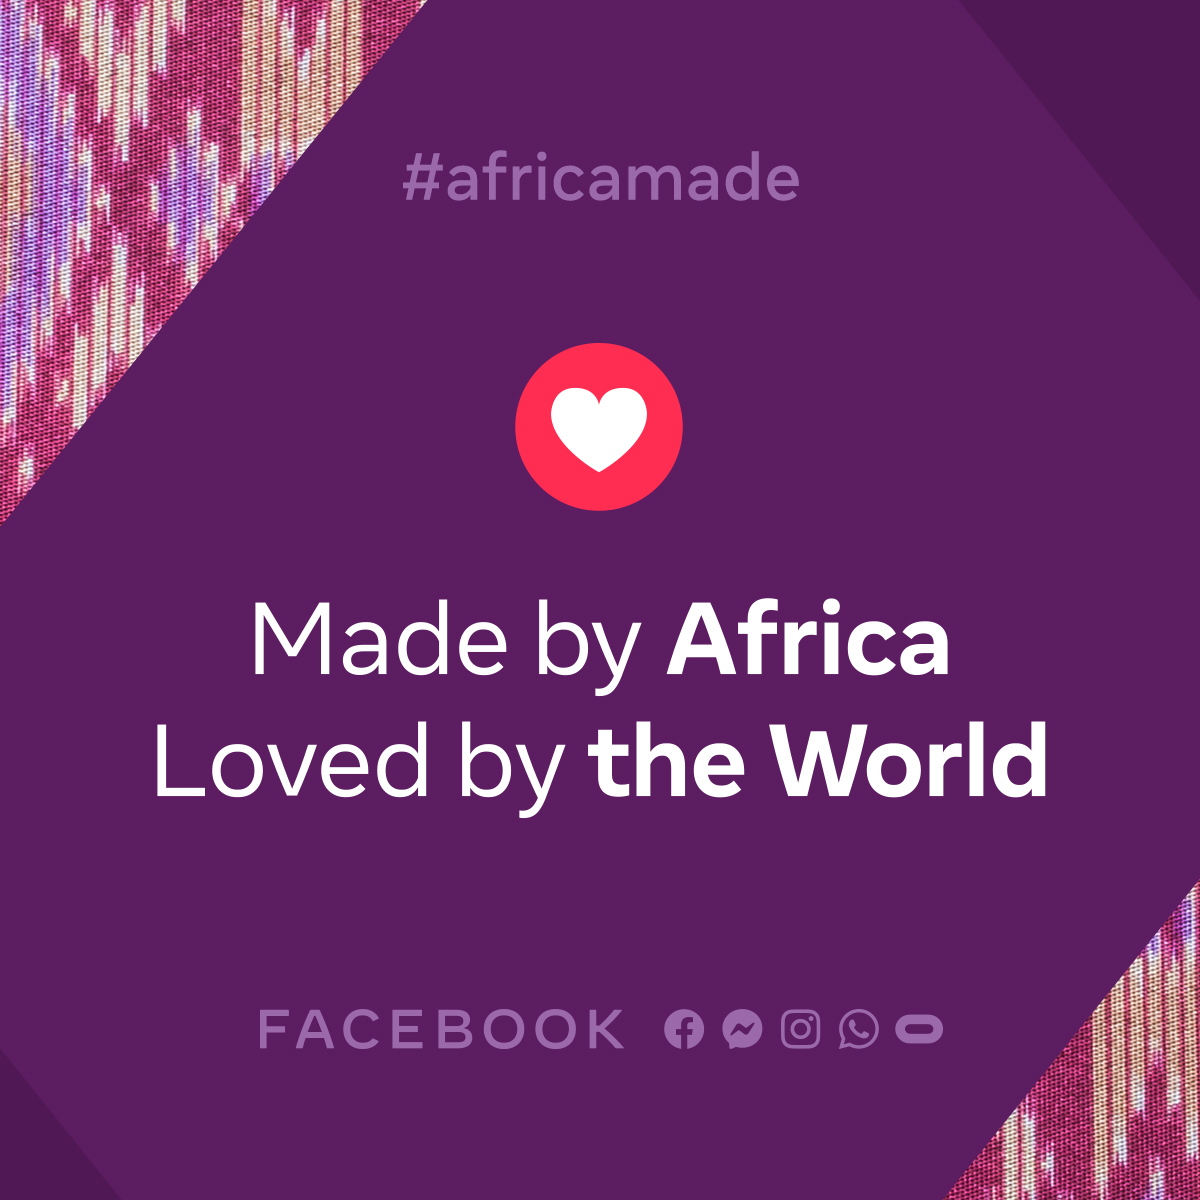 Facebook Africa launches ‘Made by Africa, Loved by the World’ ahead of Africa Day – celebrating Africa’s growing cultural impact on the World